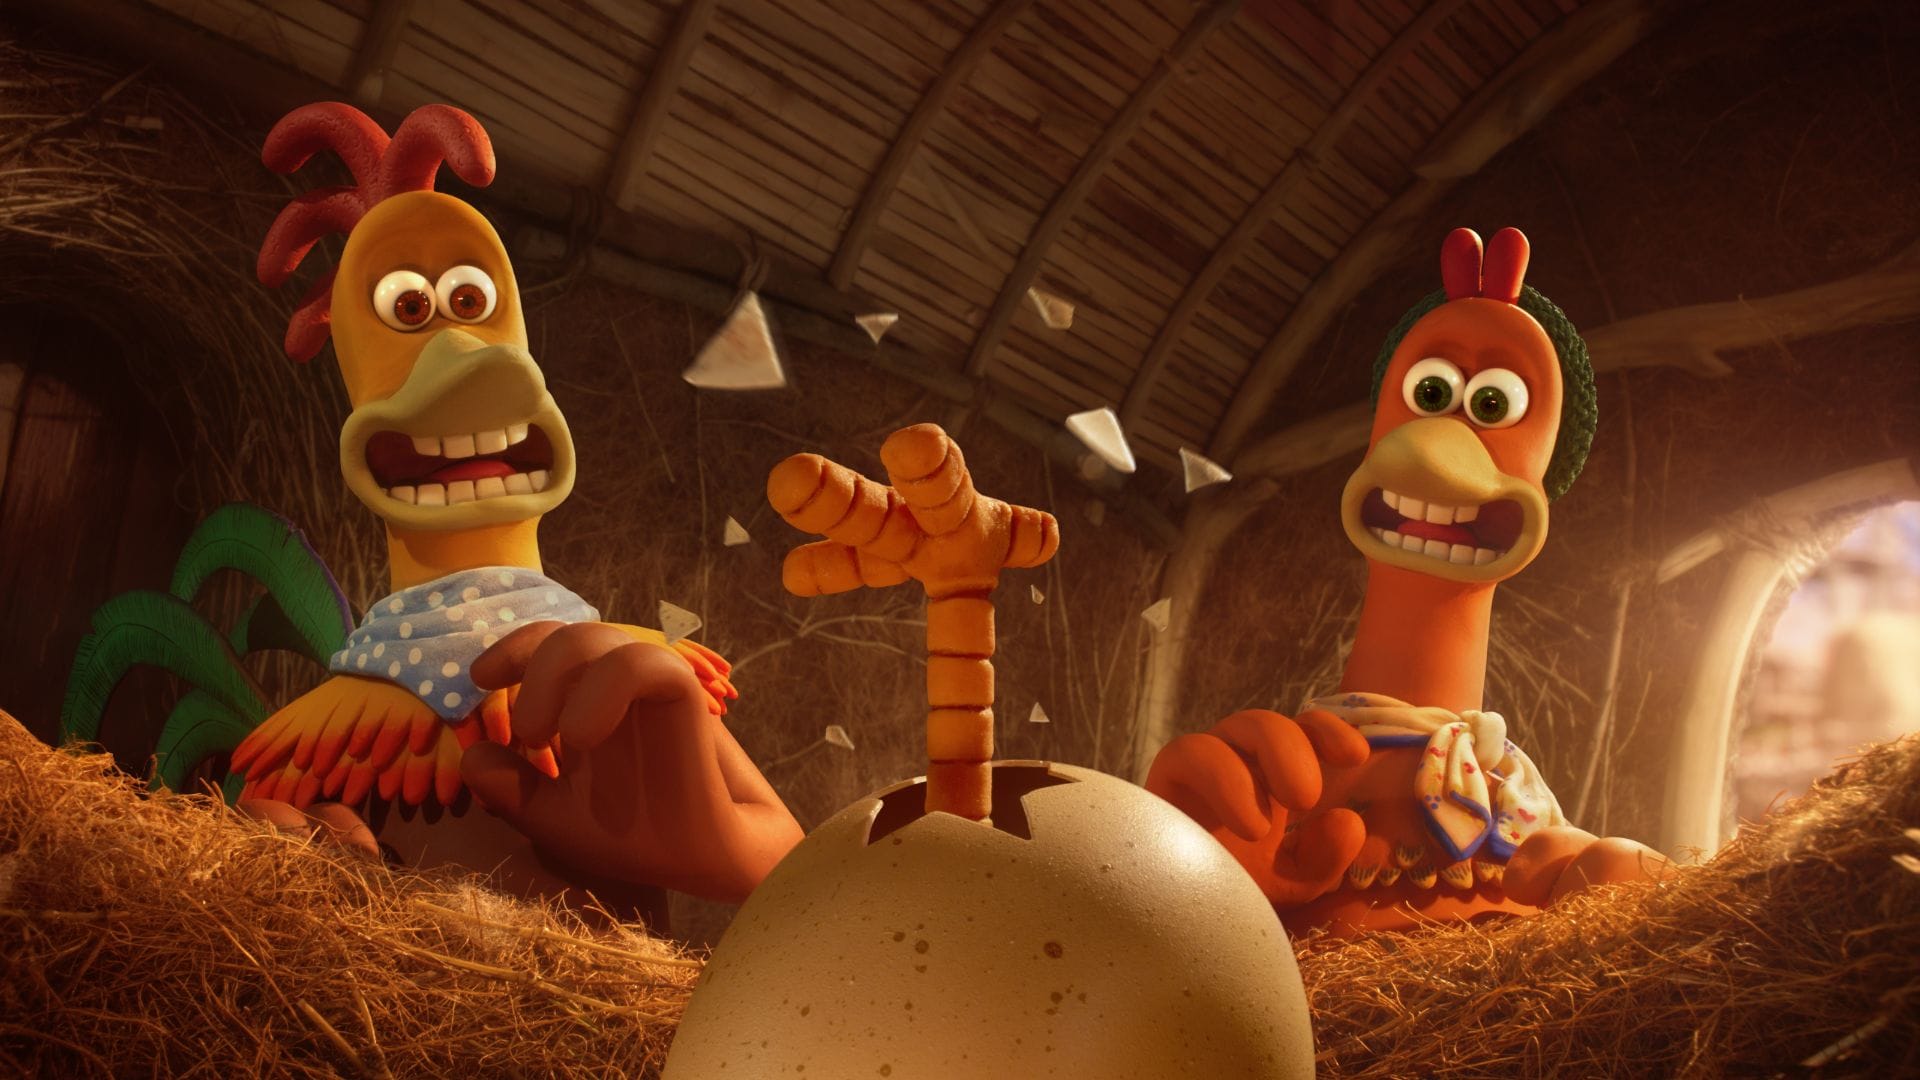 Wallace and Gromit Face Feathers McGraw Again in New Christmas Film